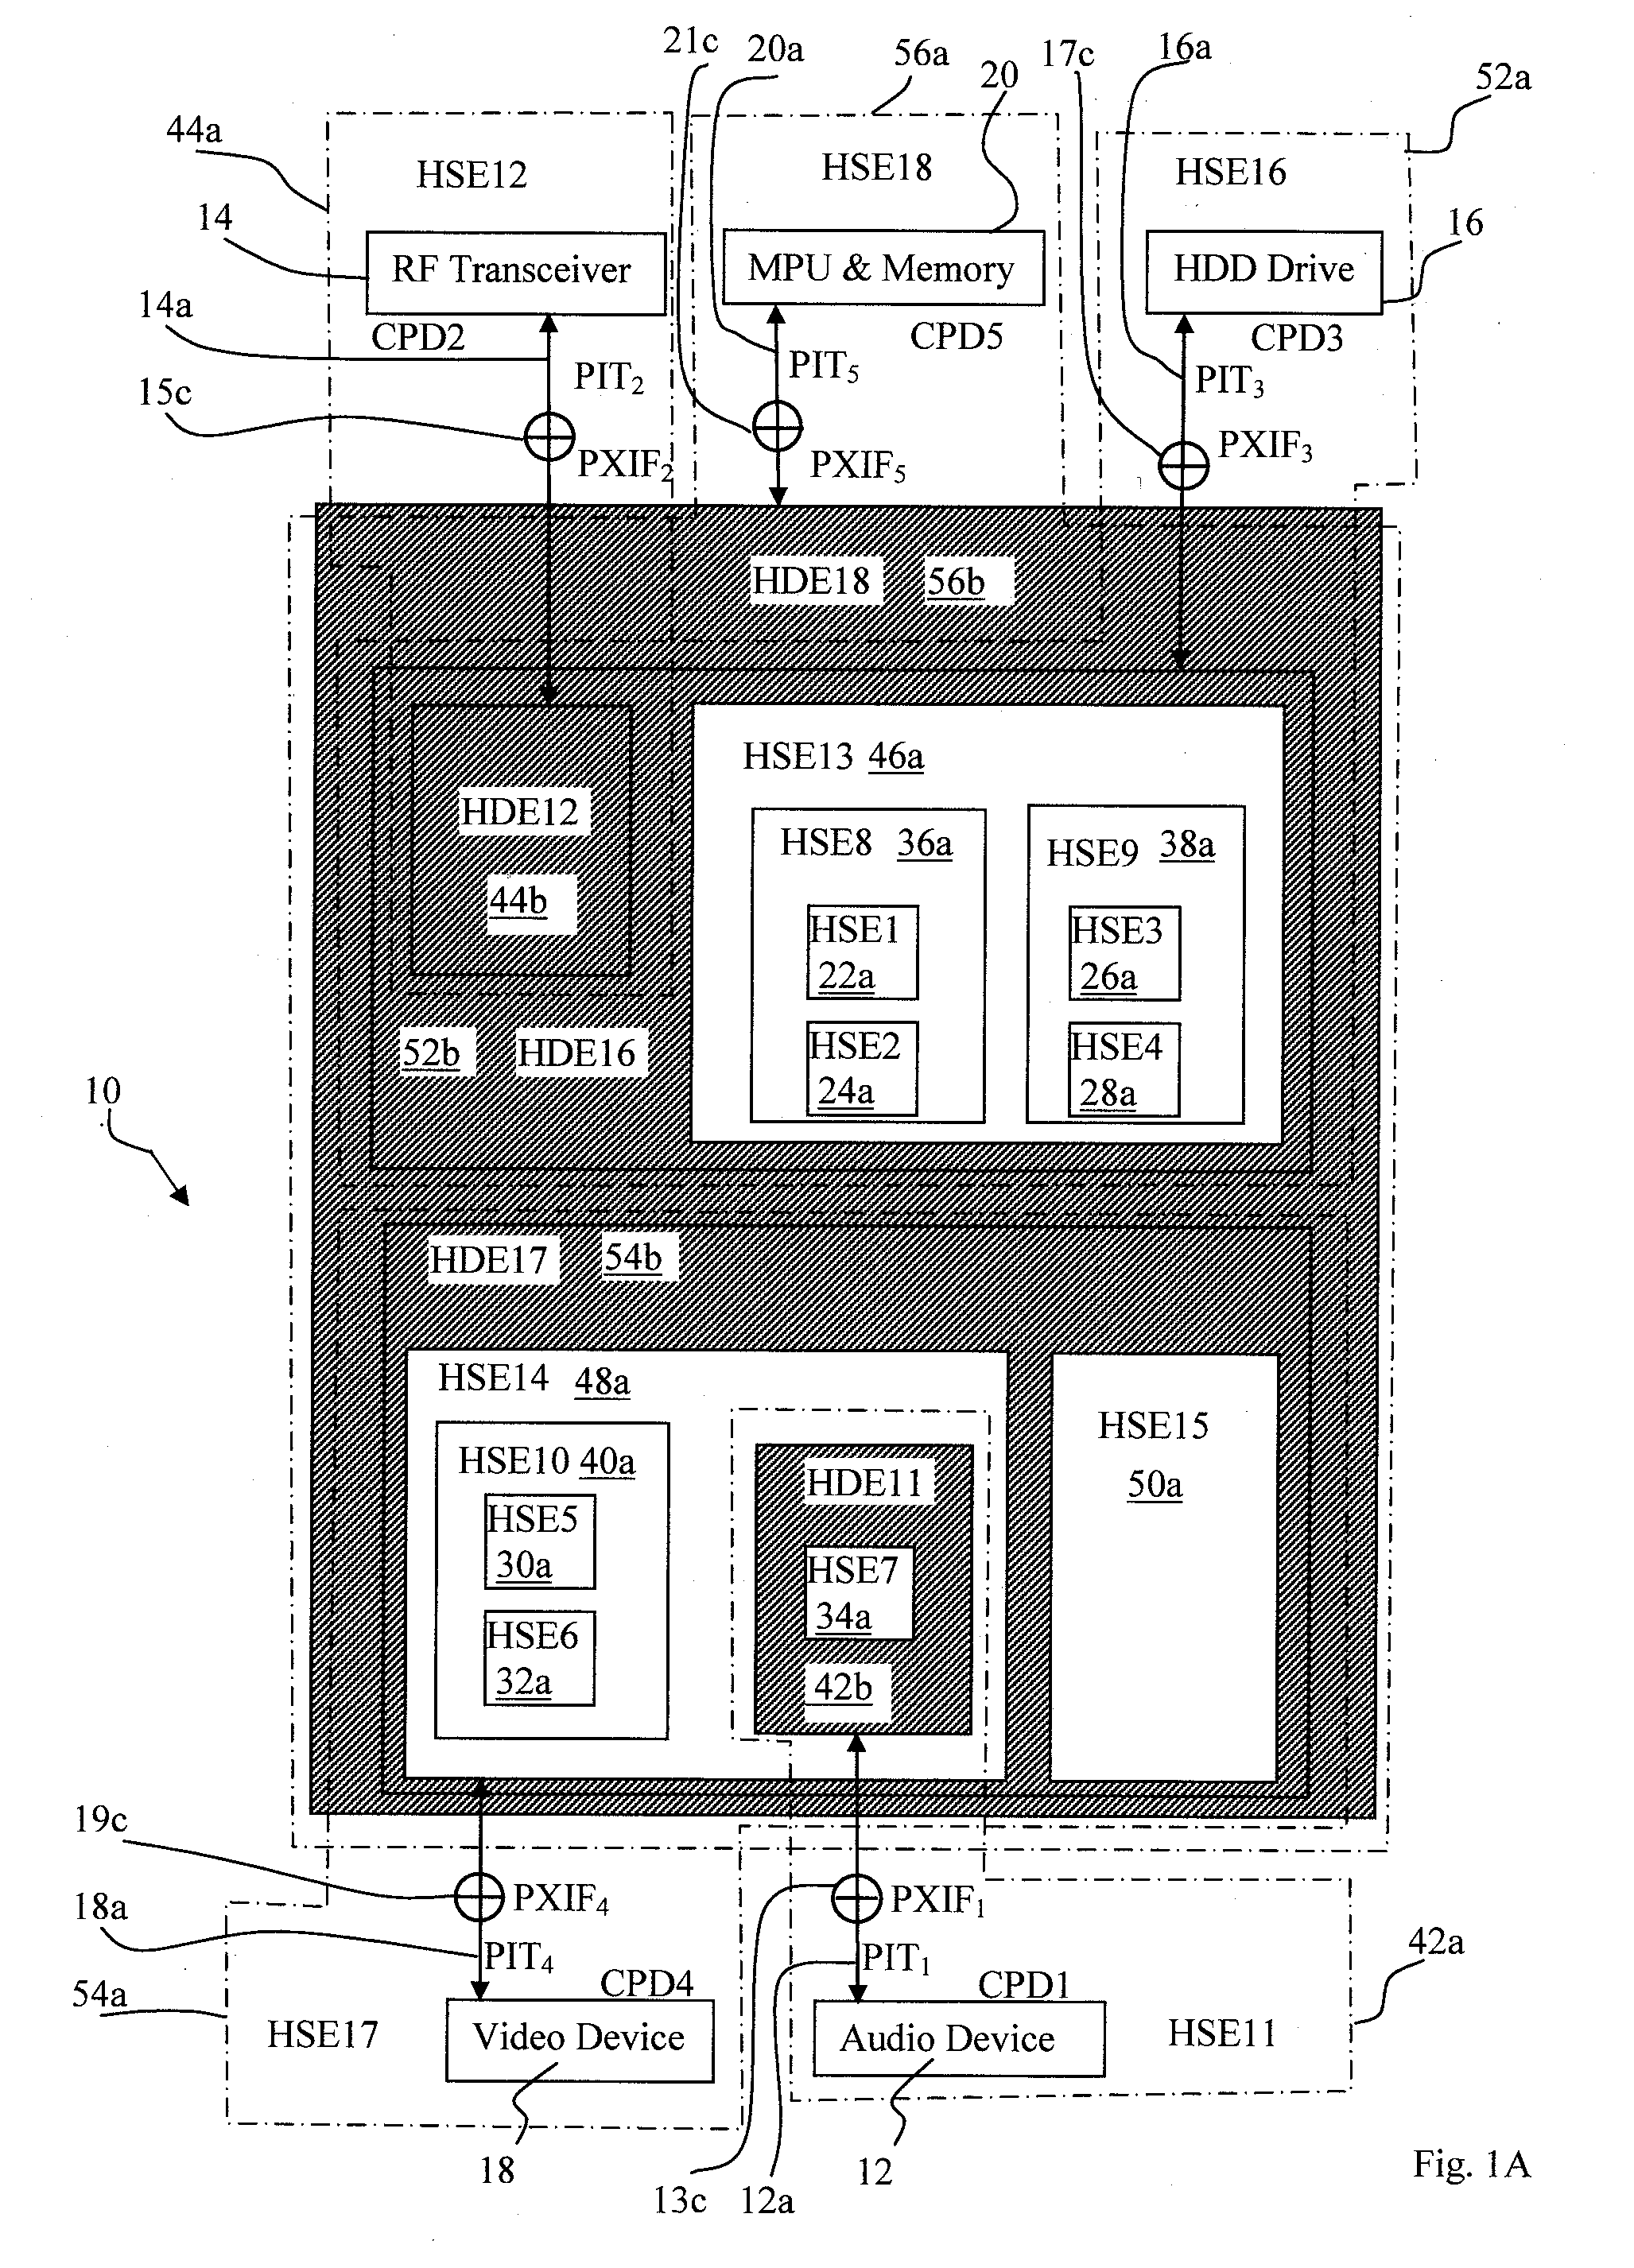 Method of progressively prototyping and validating a customer's electronic system design